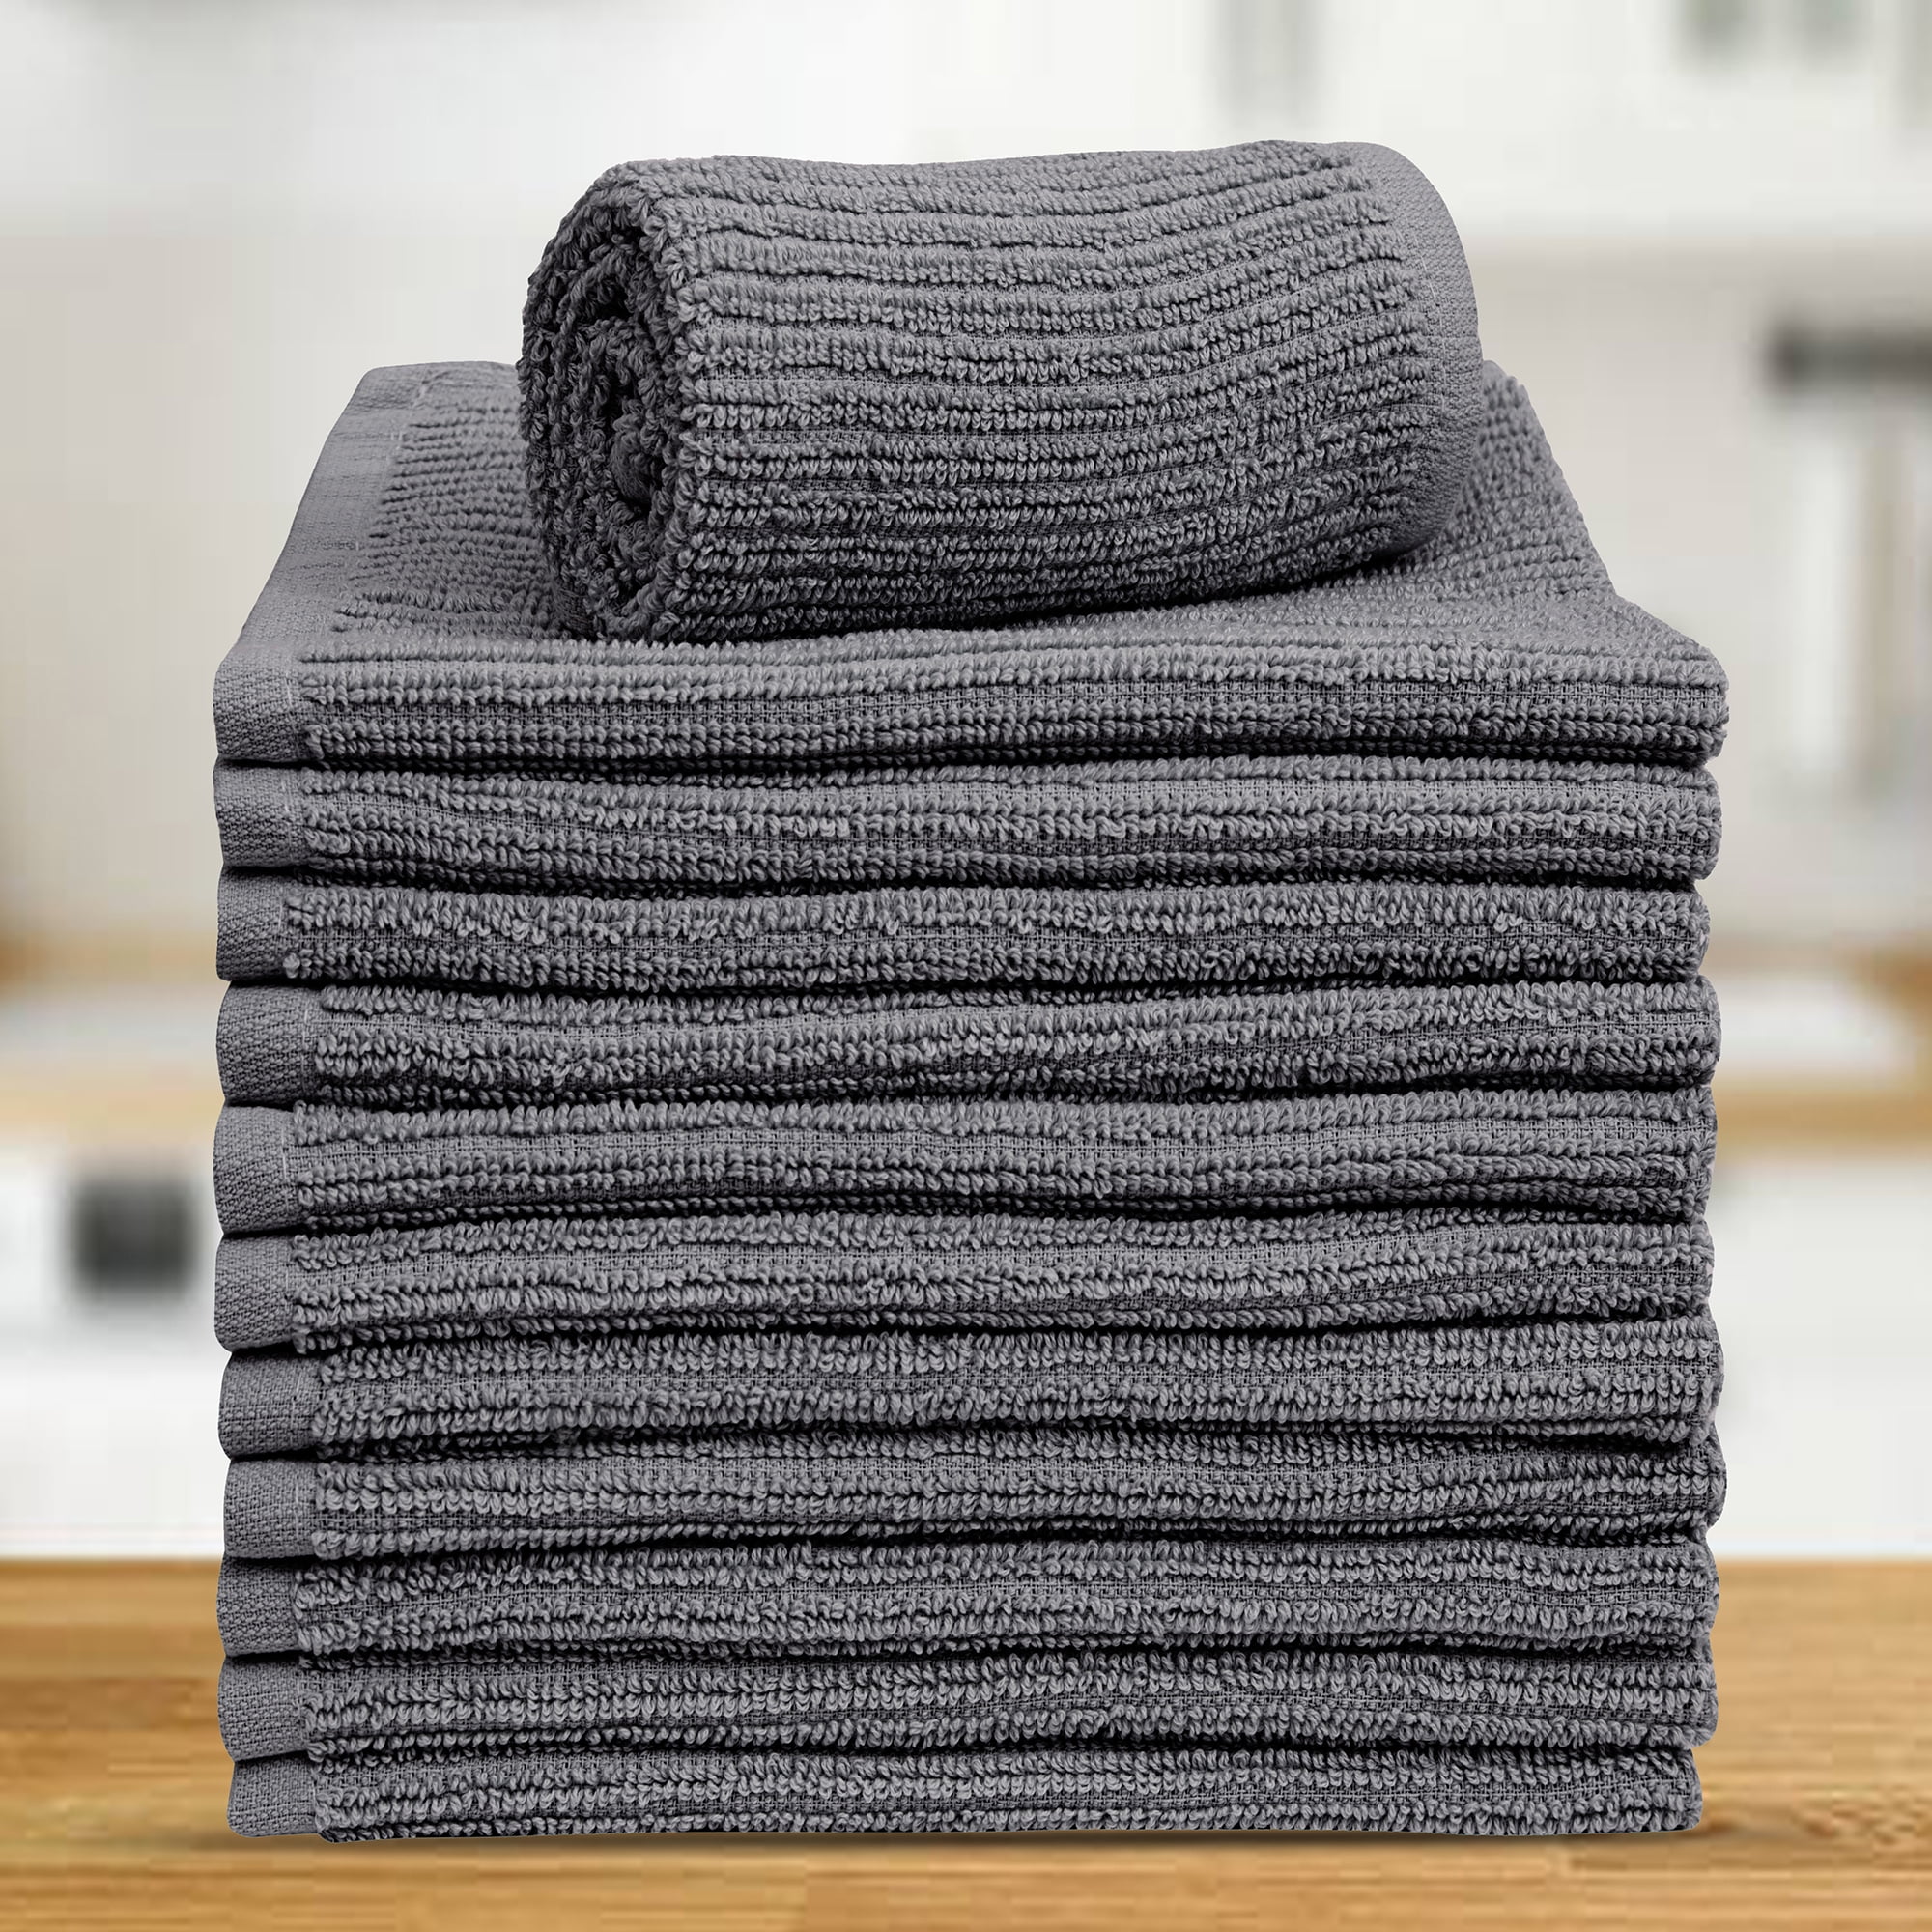 Bumble 12-Pack Antimicrobial Barmop Kitchen Towels / 16” x 19” Premium Kitchen  Towels/Super Absorbent Heavy Weight Cotton/Ribbed Weave - Clean Palette 